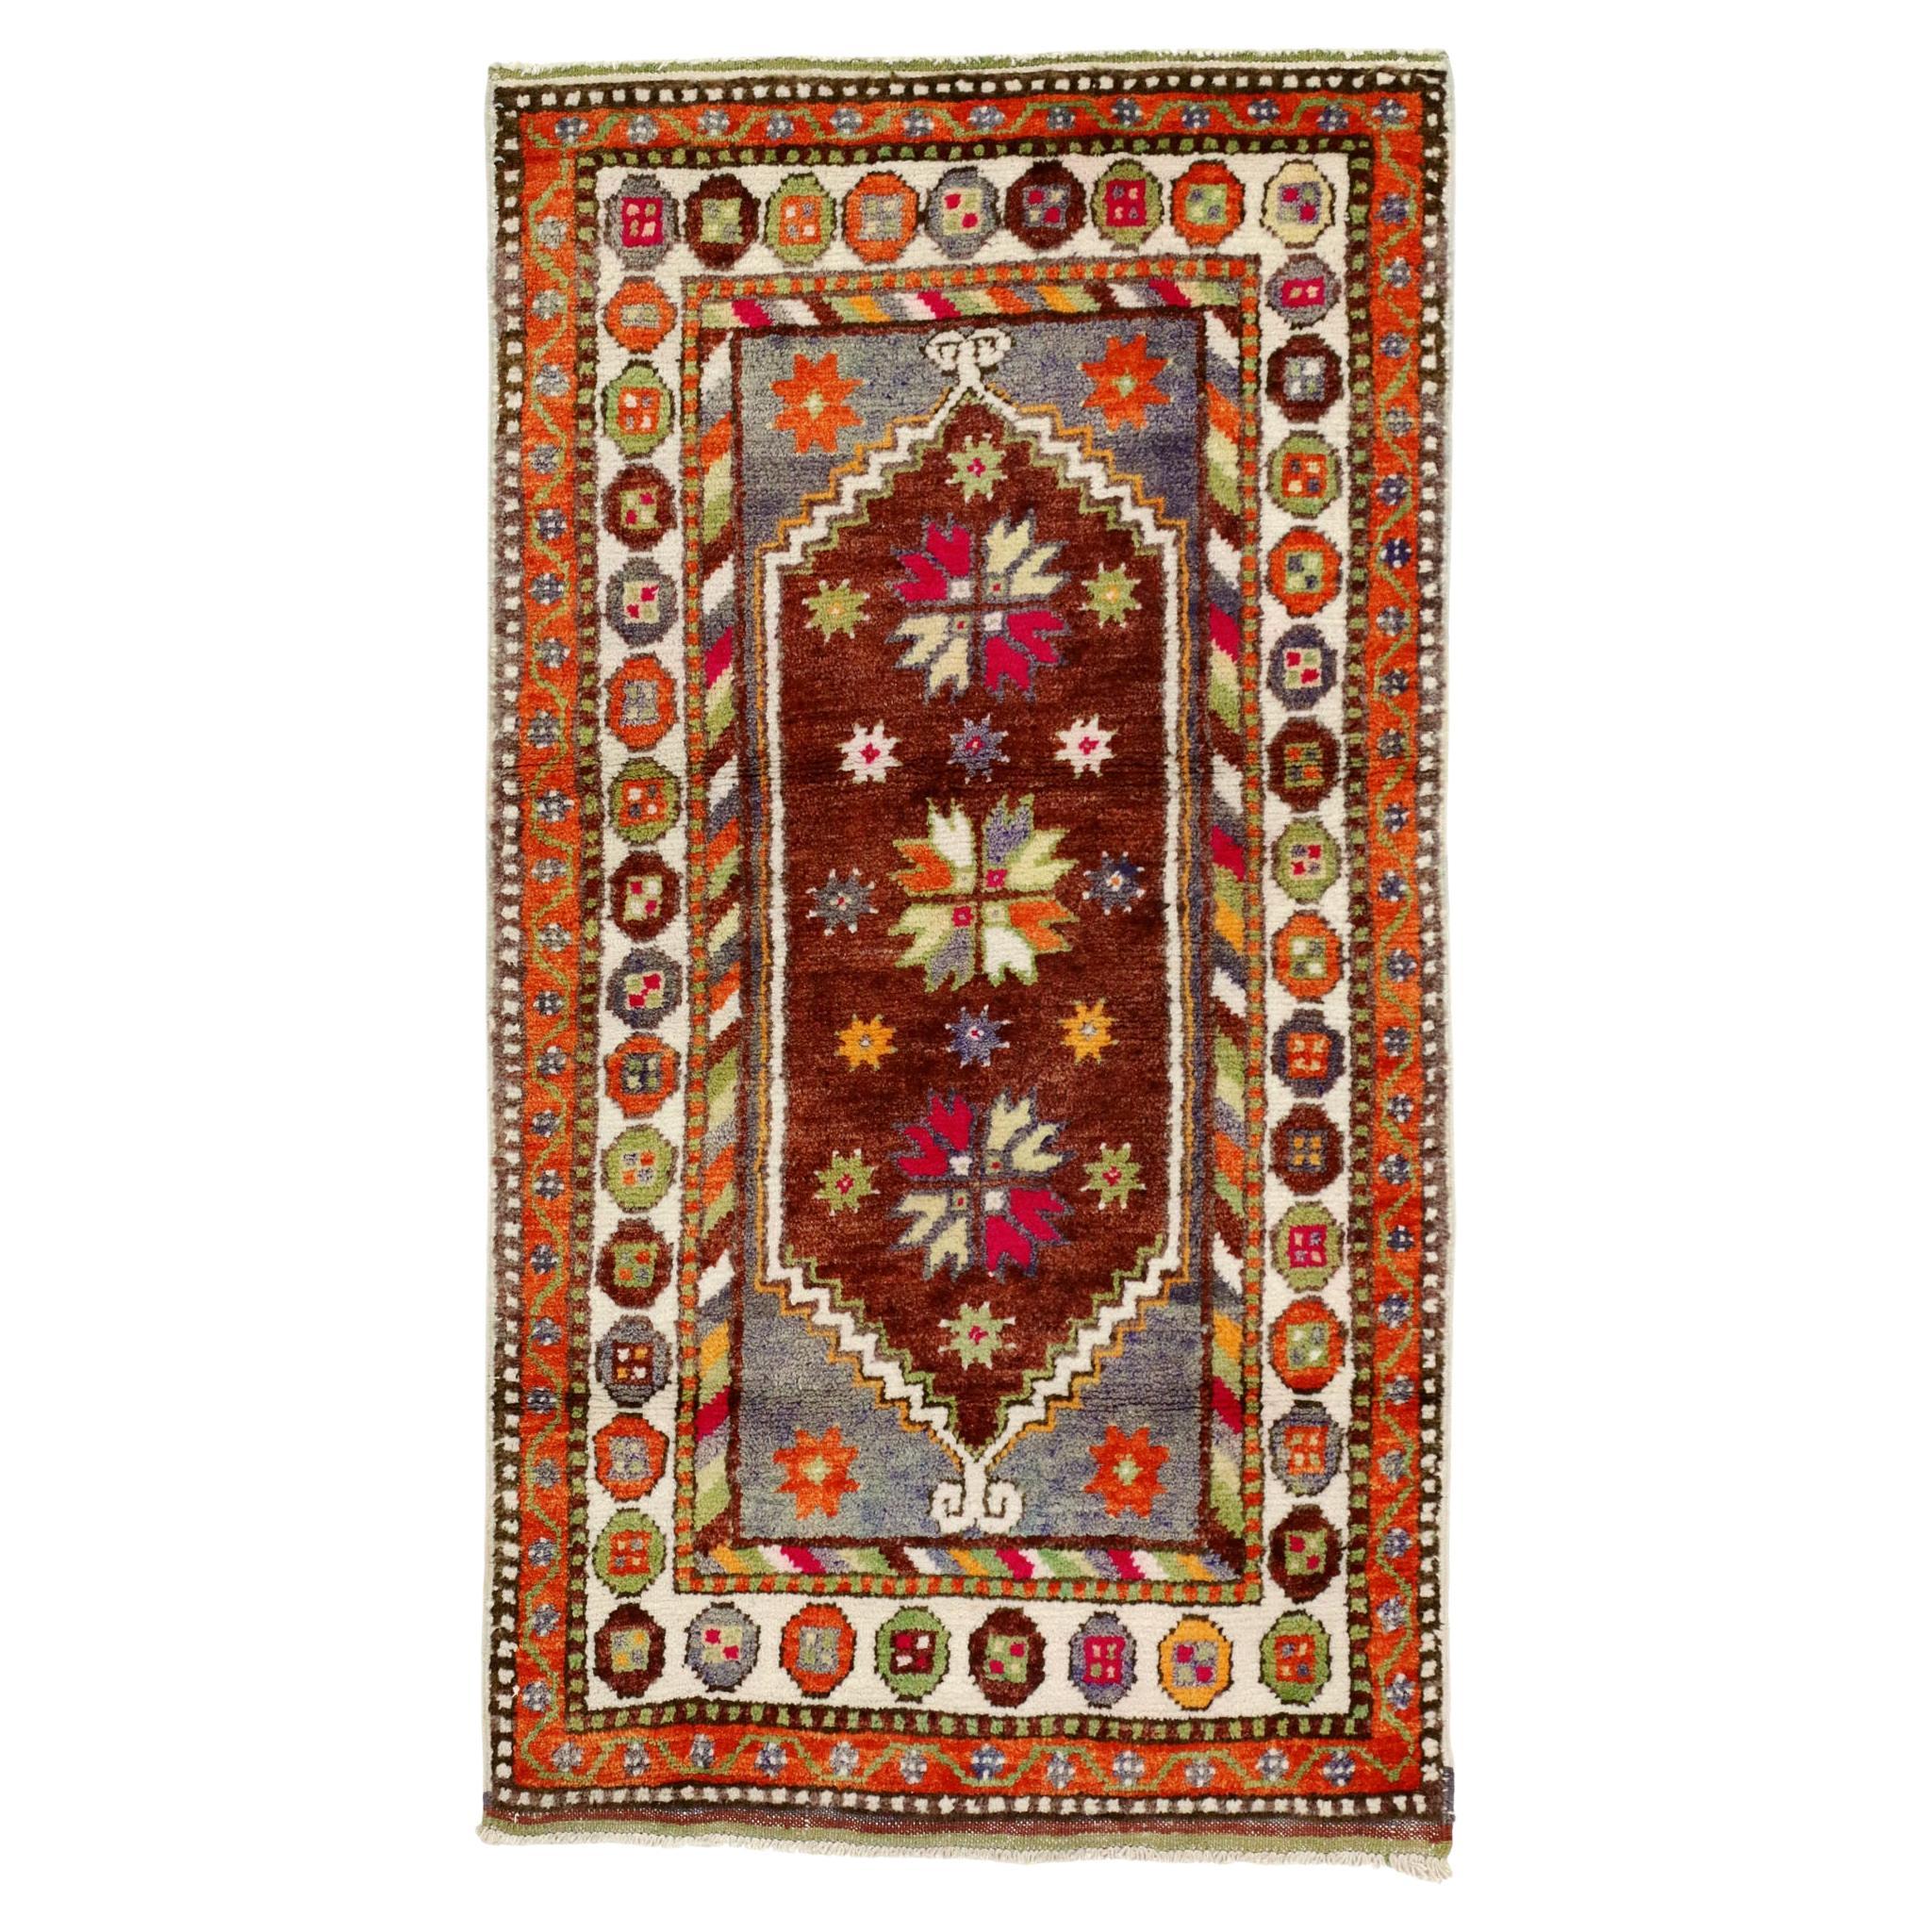 Vintage Turkish Oushak Rug, Colorfully Curated Meets Whimsical Boho